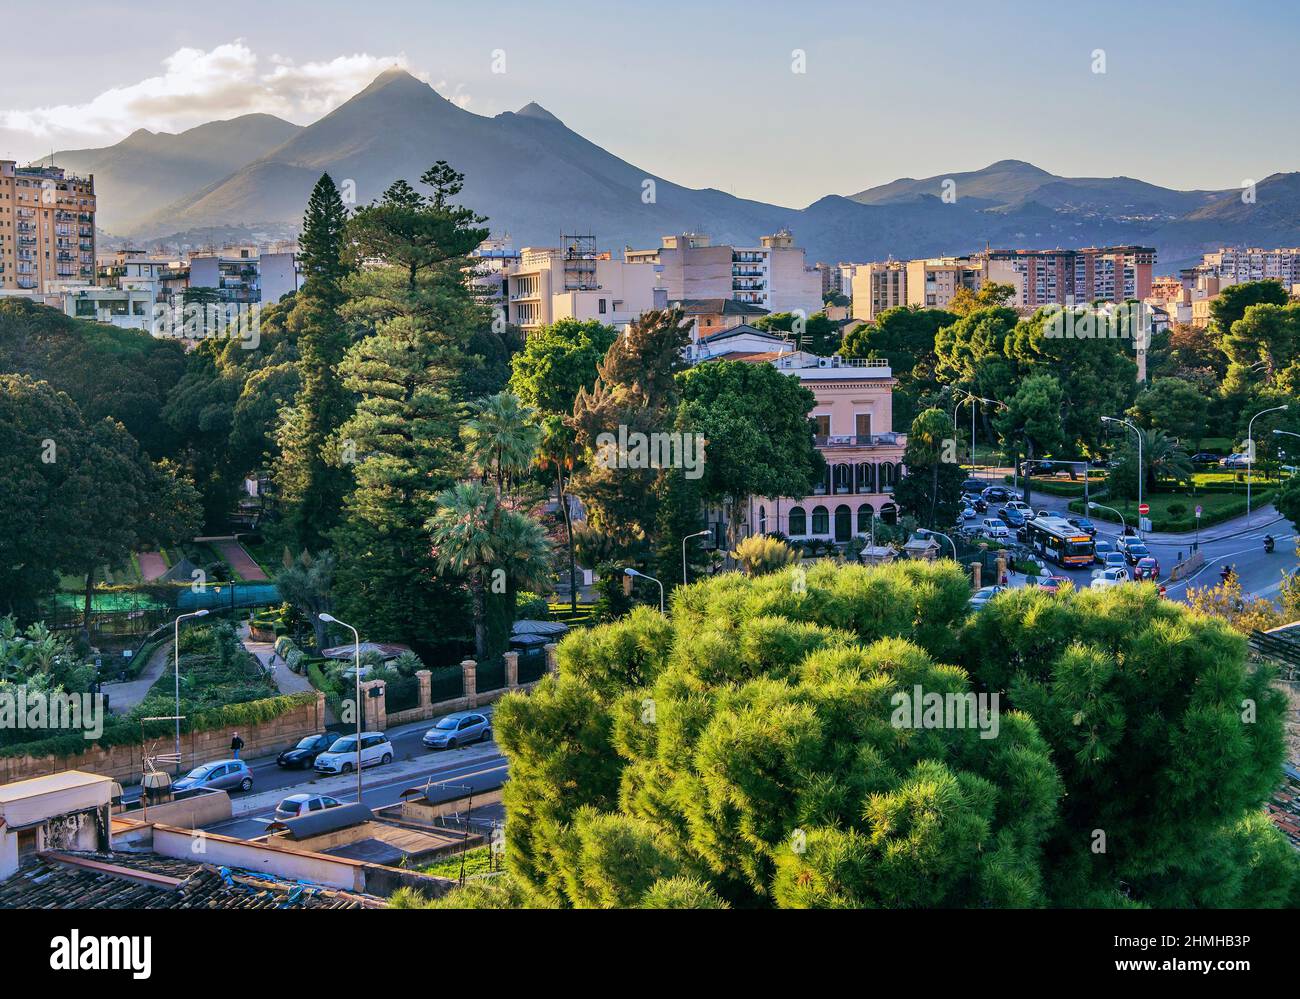 Parco d`Orleans and Giardino Piazza Indipendenza in front of the old town, Palermo, Sicily, Italy Stock Photo